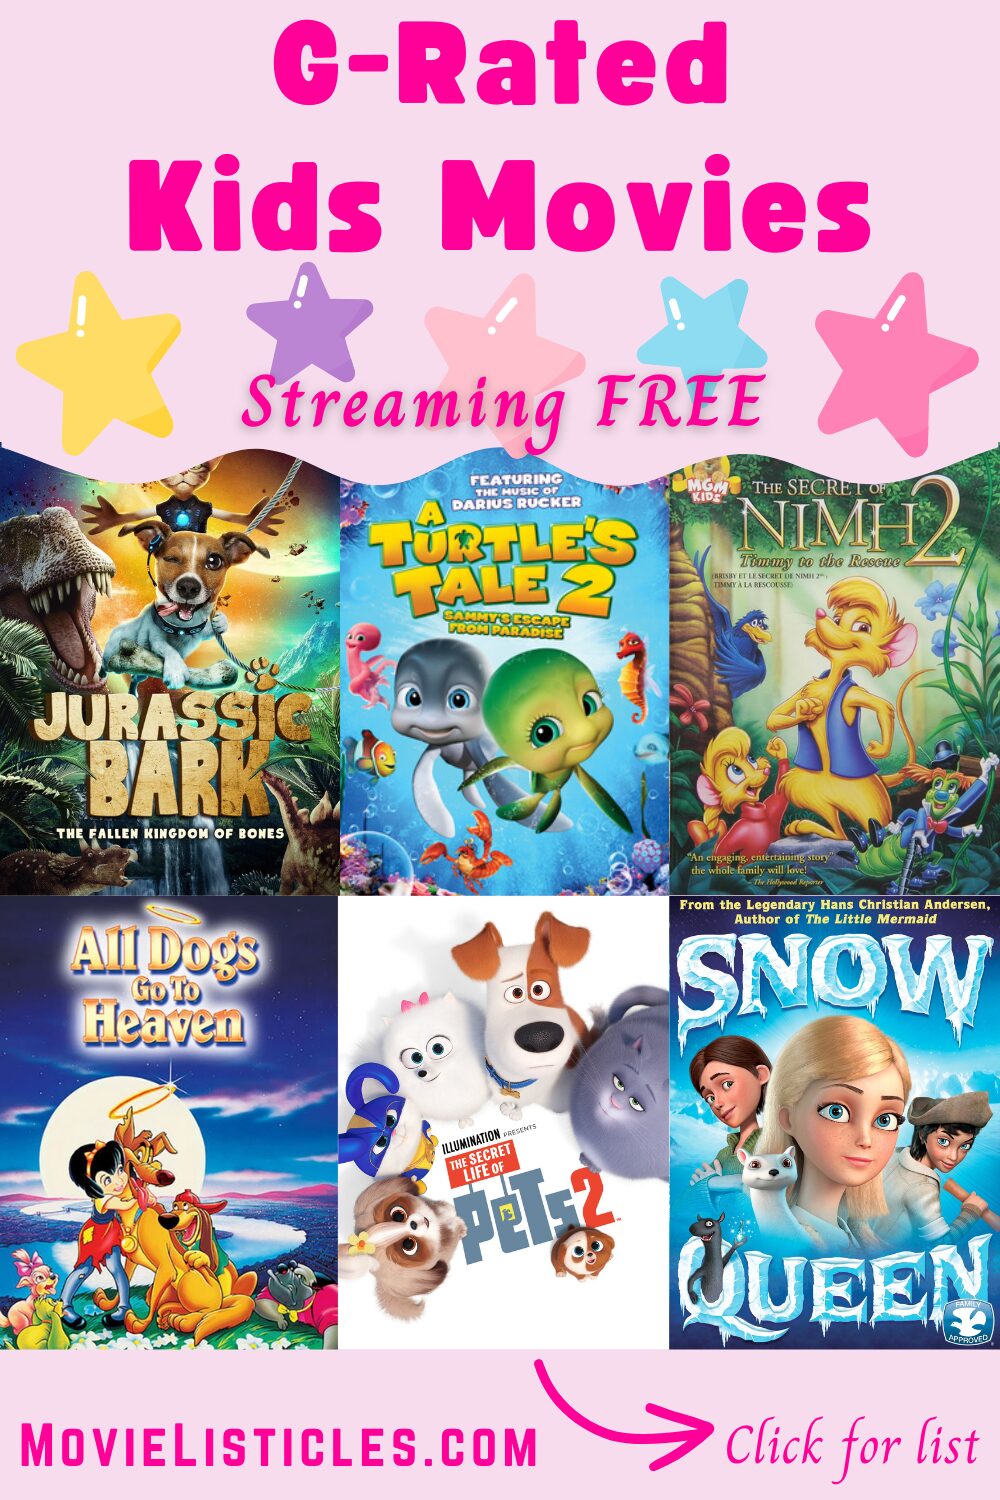 G-Rated free kids movies